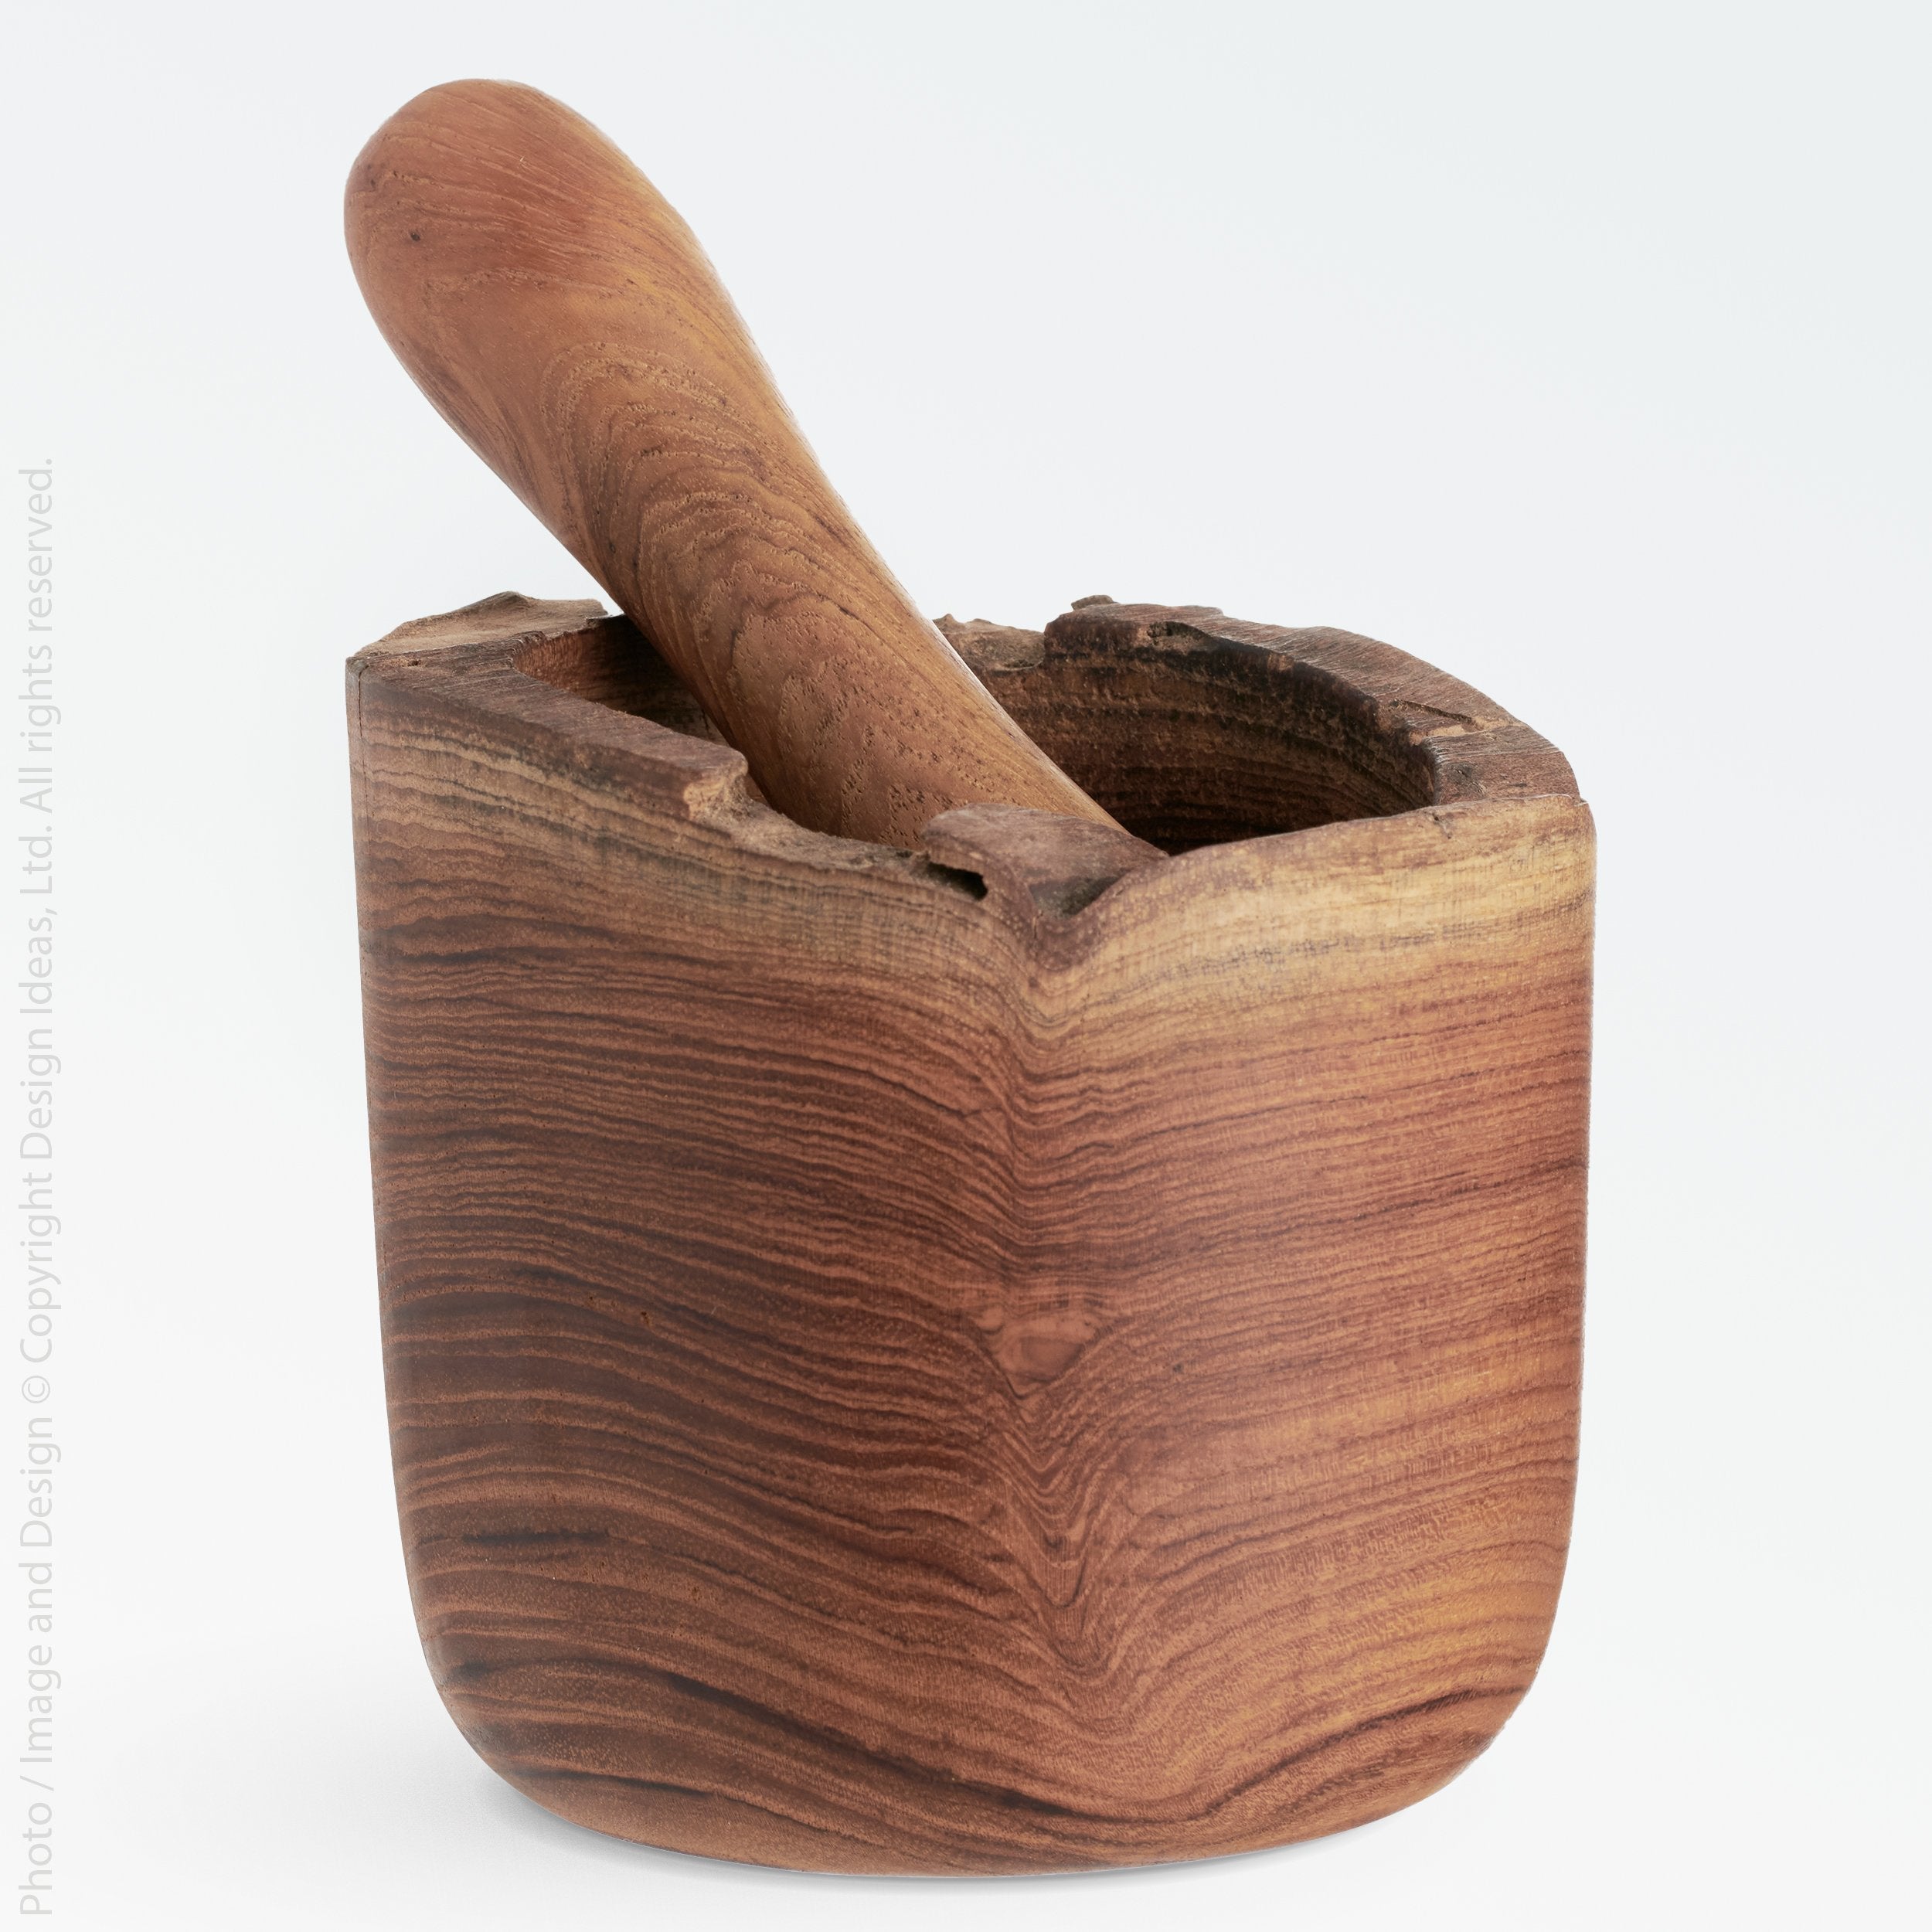 Takara Teak Root Mortar &amp; Pestle - Black Color | Image 1 | From the Takara Collection | Elegantly handmade with natural teak root for long lasting use | This bowl is sustainably sourced | Available in natural color | texxture home